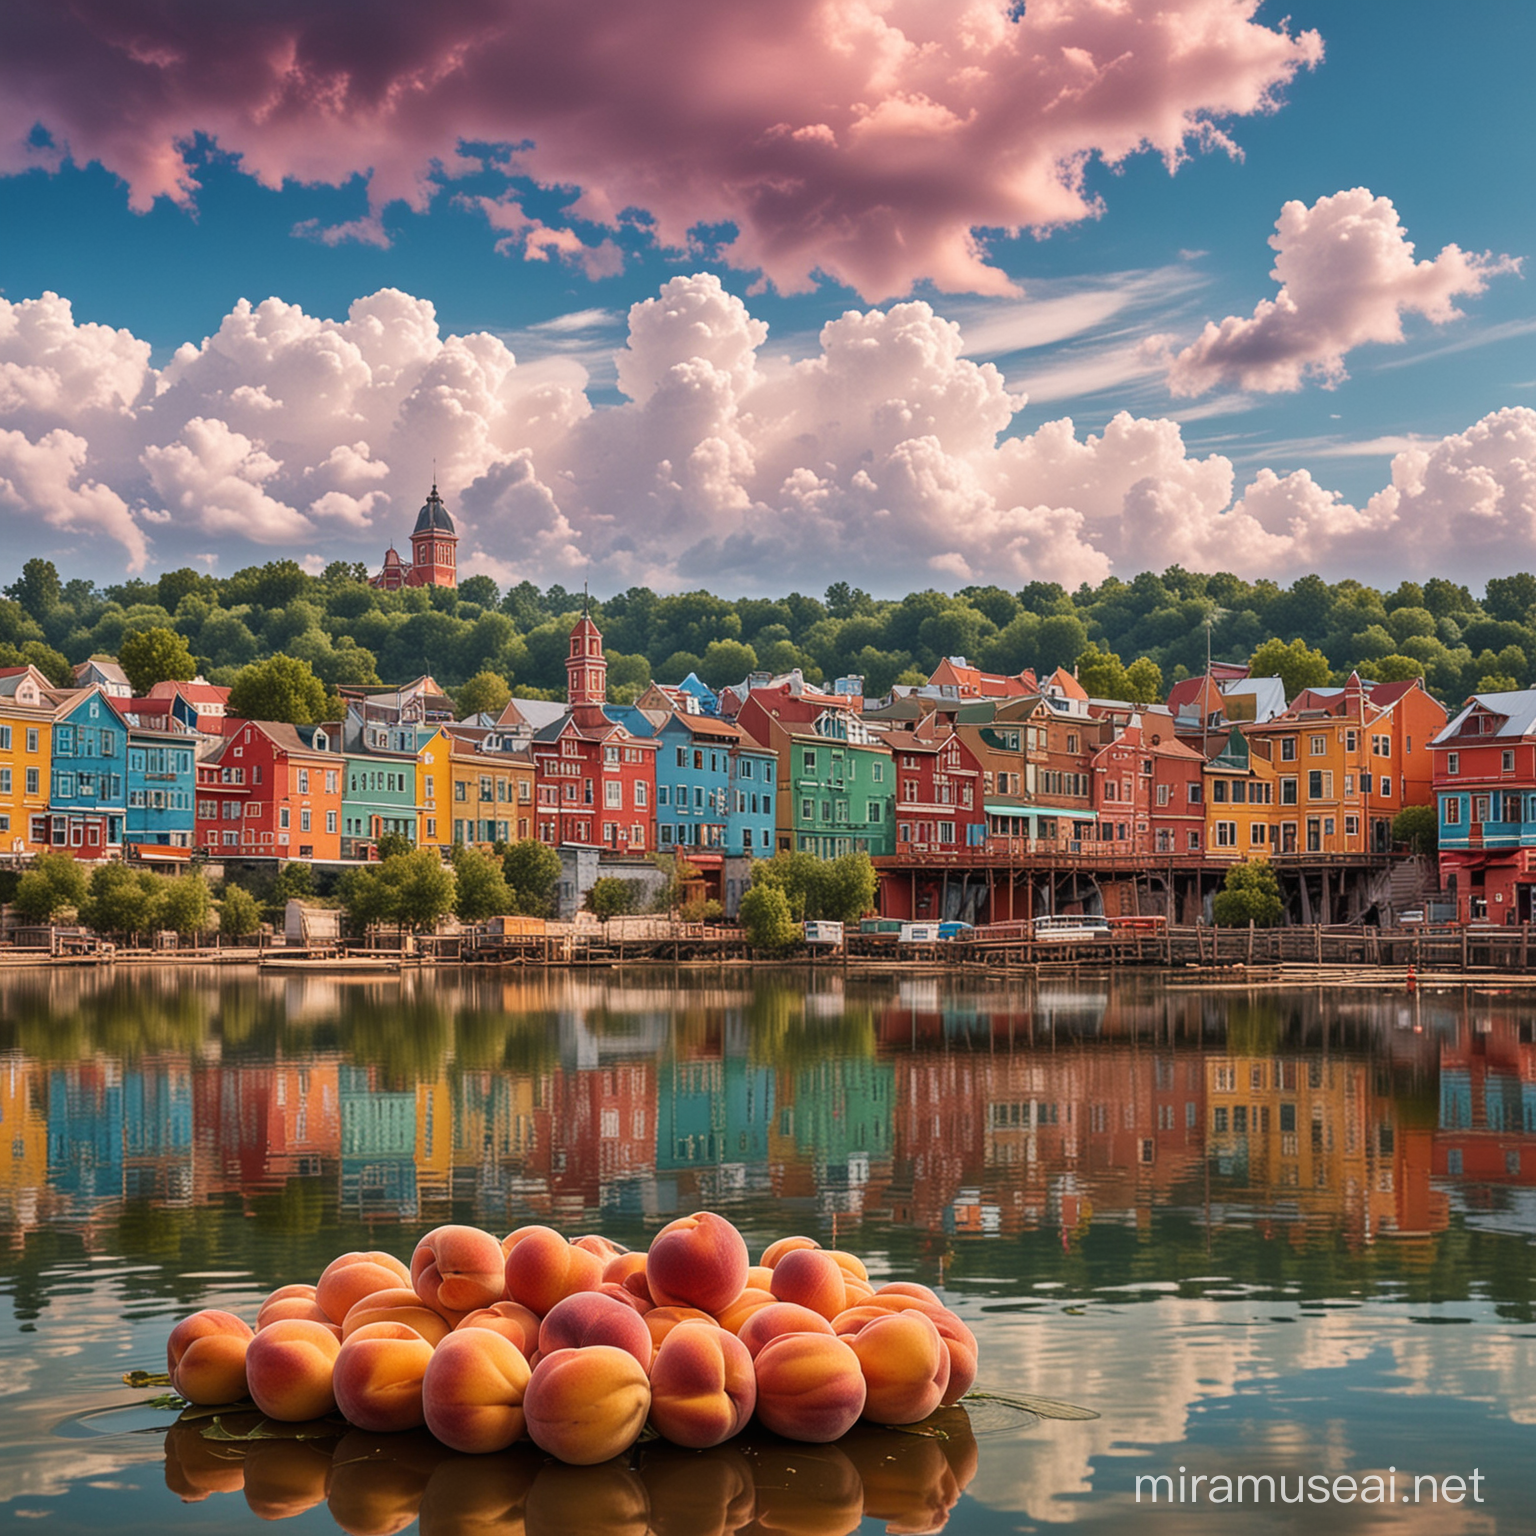 The image is a pile of Peaches.The image shows a row of colorful buildings with a background of a sky, water, and clouds. There is a lake with a bridge and pier visible, creating a picturesque cityscape with reflections on the water. The additional context mentions "Peaches."